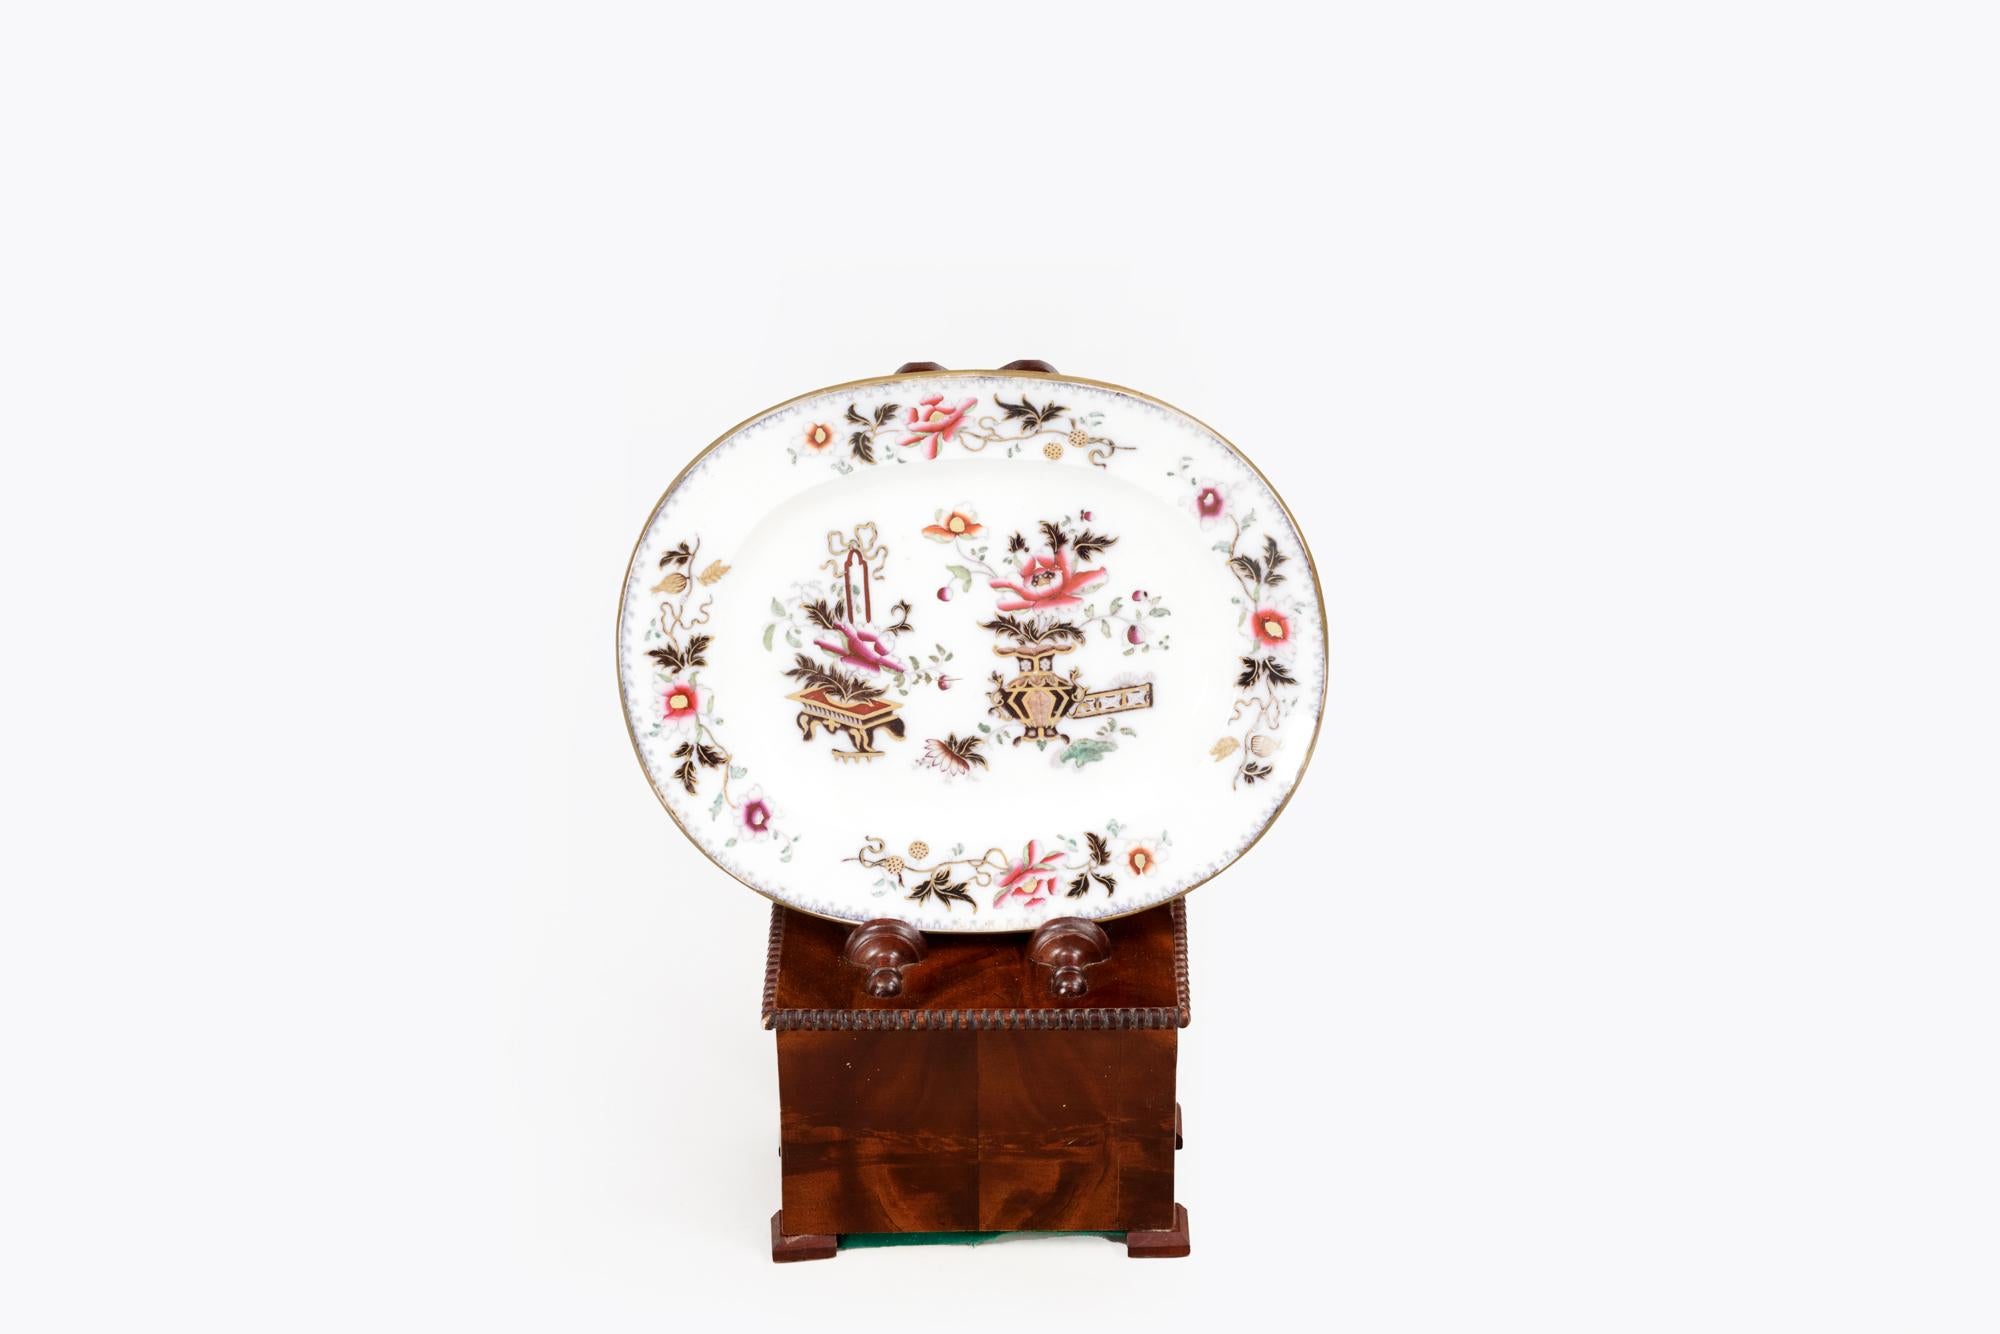 19th Century Regency weighted salver stand having figured mahogany veneers, beaded mouldings, and simple feet. The shaped rectangular moulded back above a rectangular lead-loaded base, with beaded edge and split baluster turned rests. It is